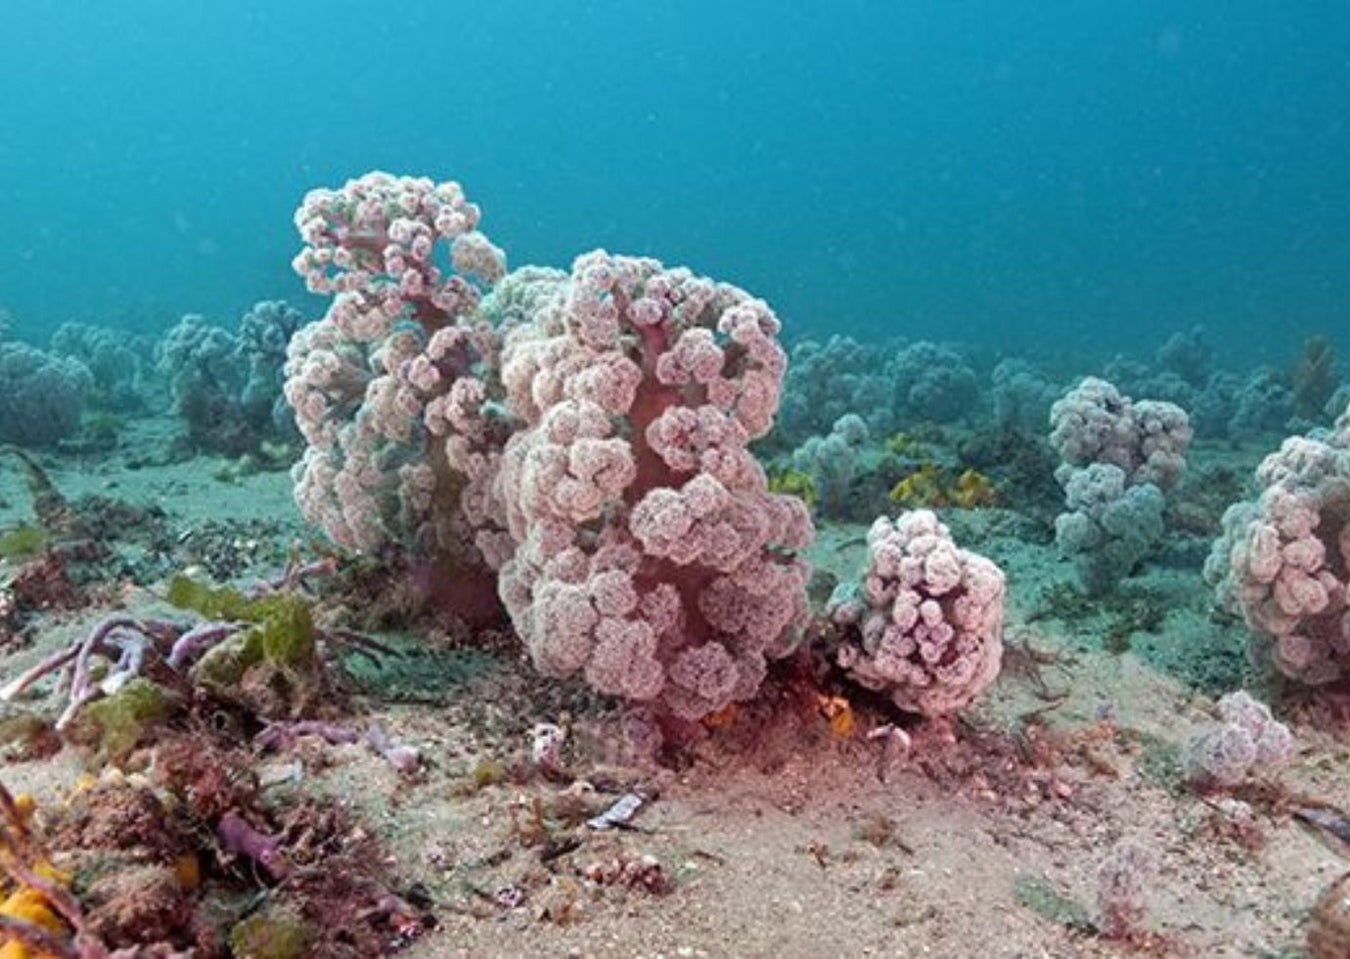 Soft corals, like sea fingers and sea whips, are soft and bendable and often resemble plants or trees.